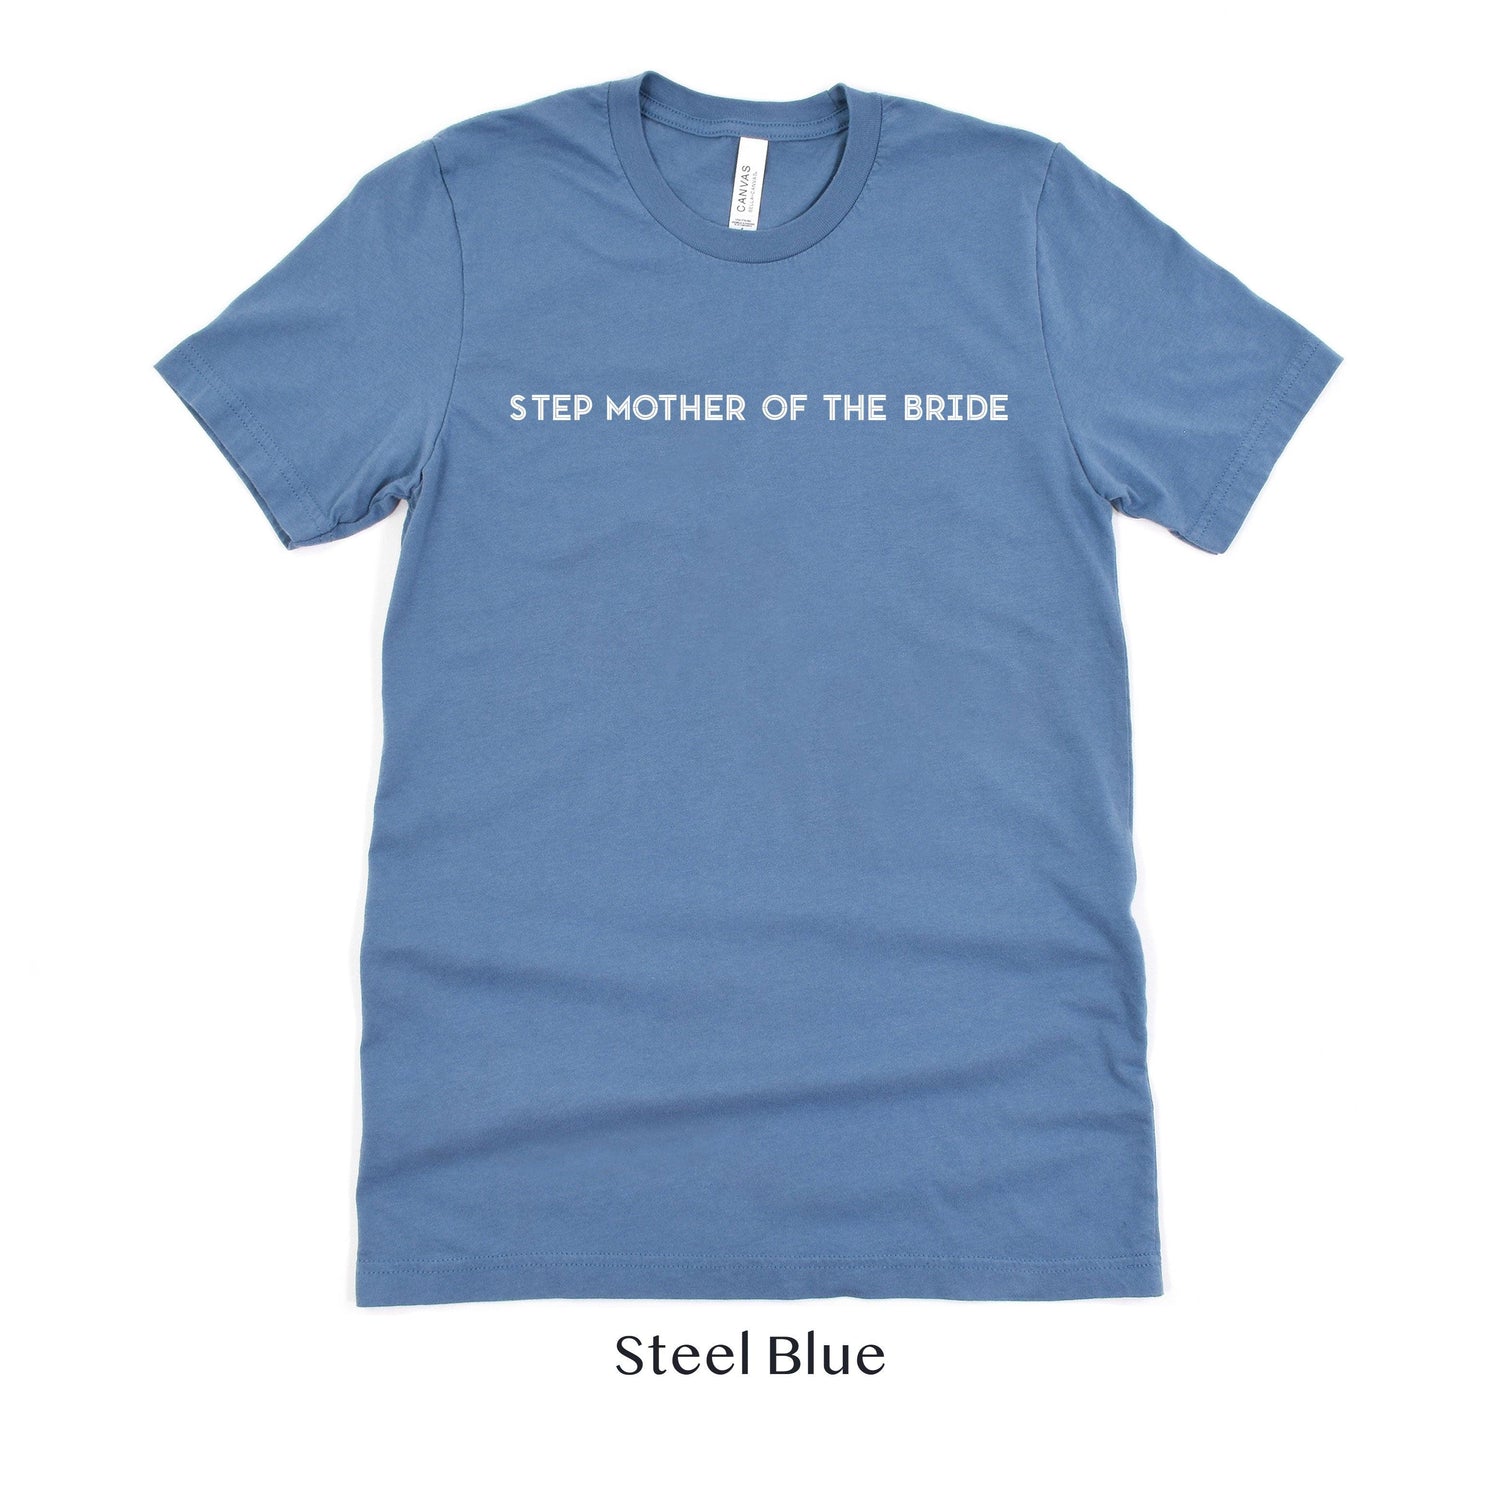 Step Mother of the Bride Shirt - Matching Wedding Party Tshirts - Unisex t-shirt by Oaklynn Lane